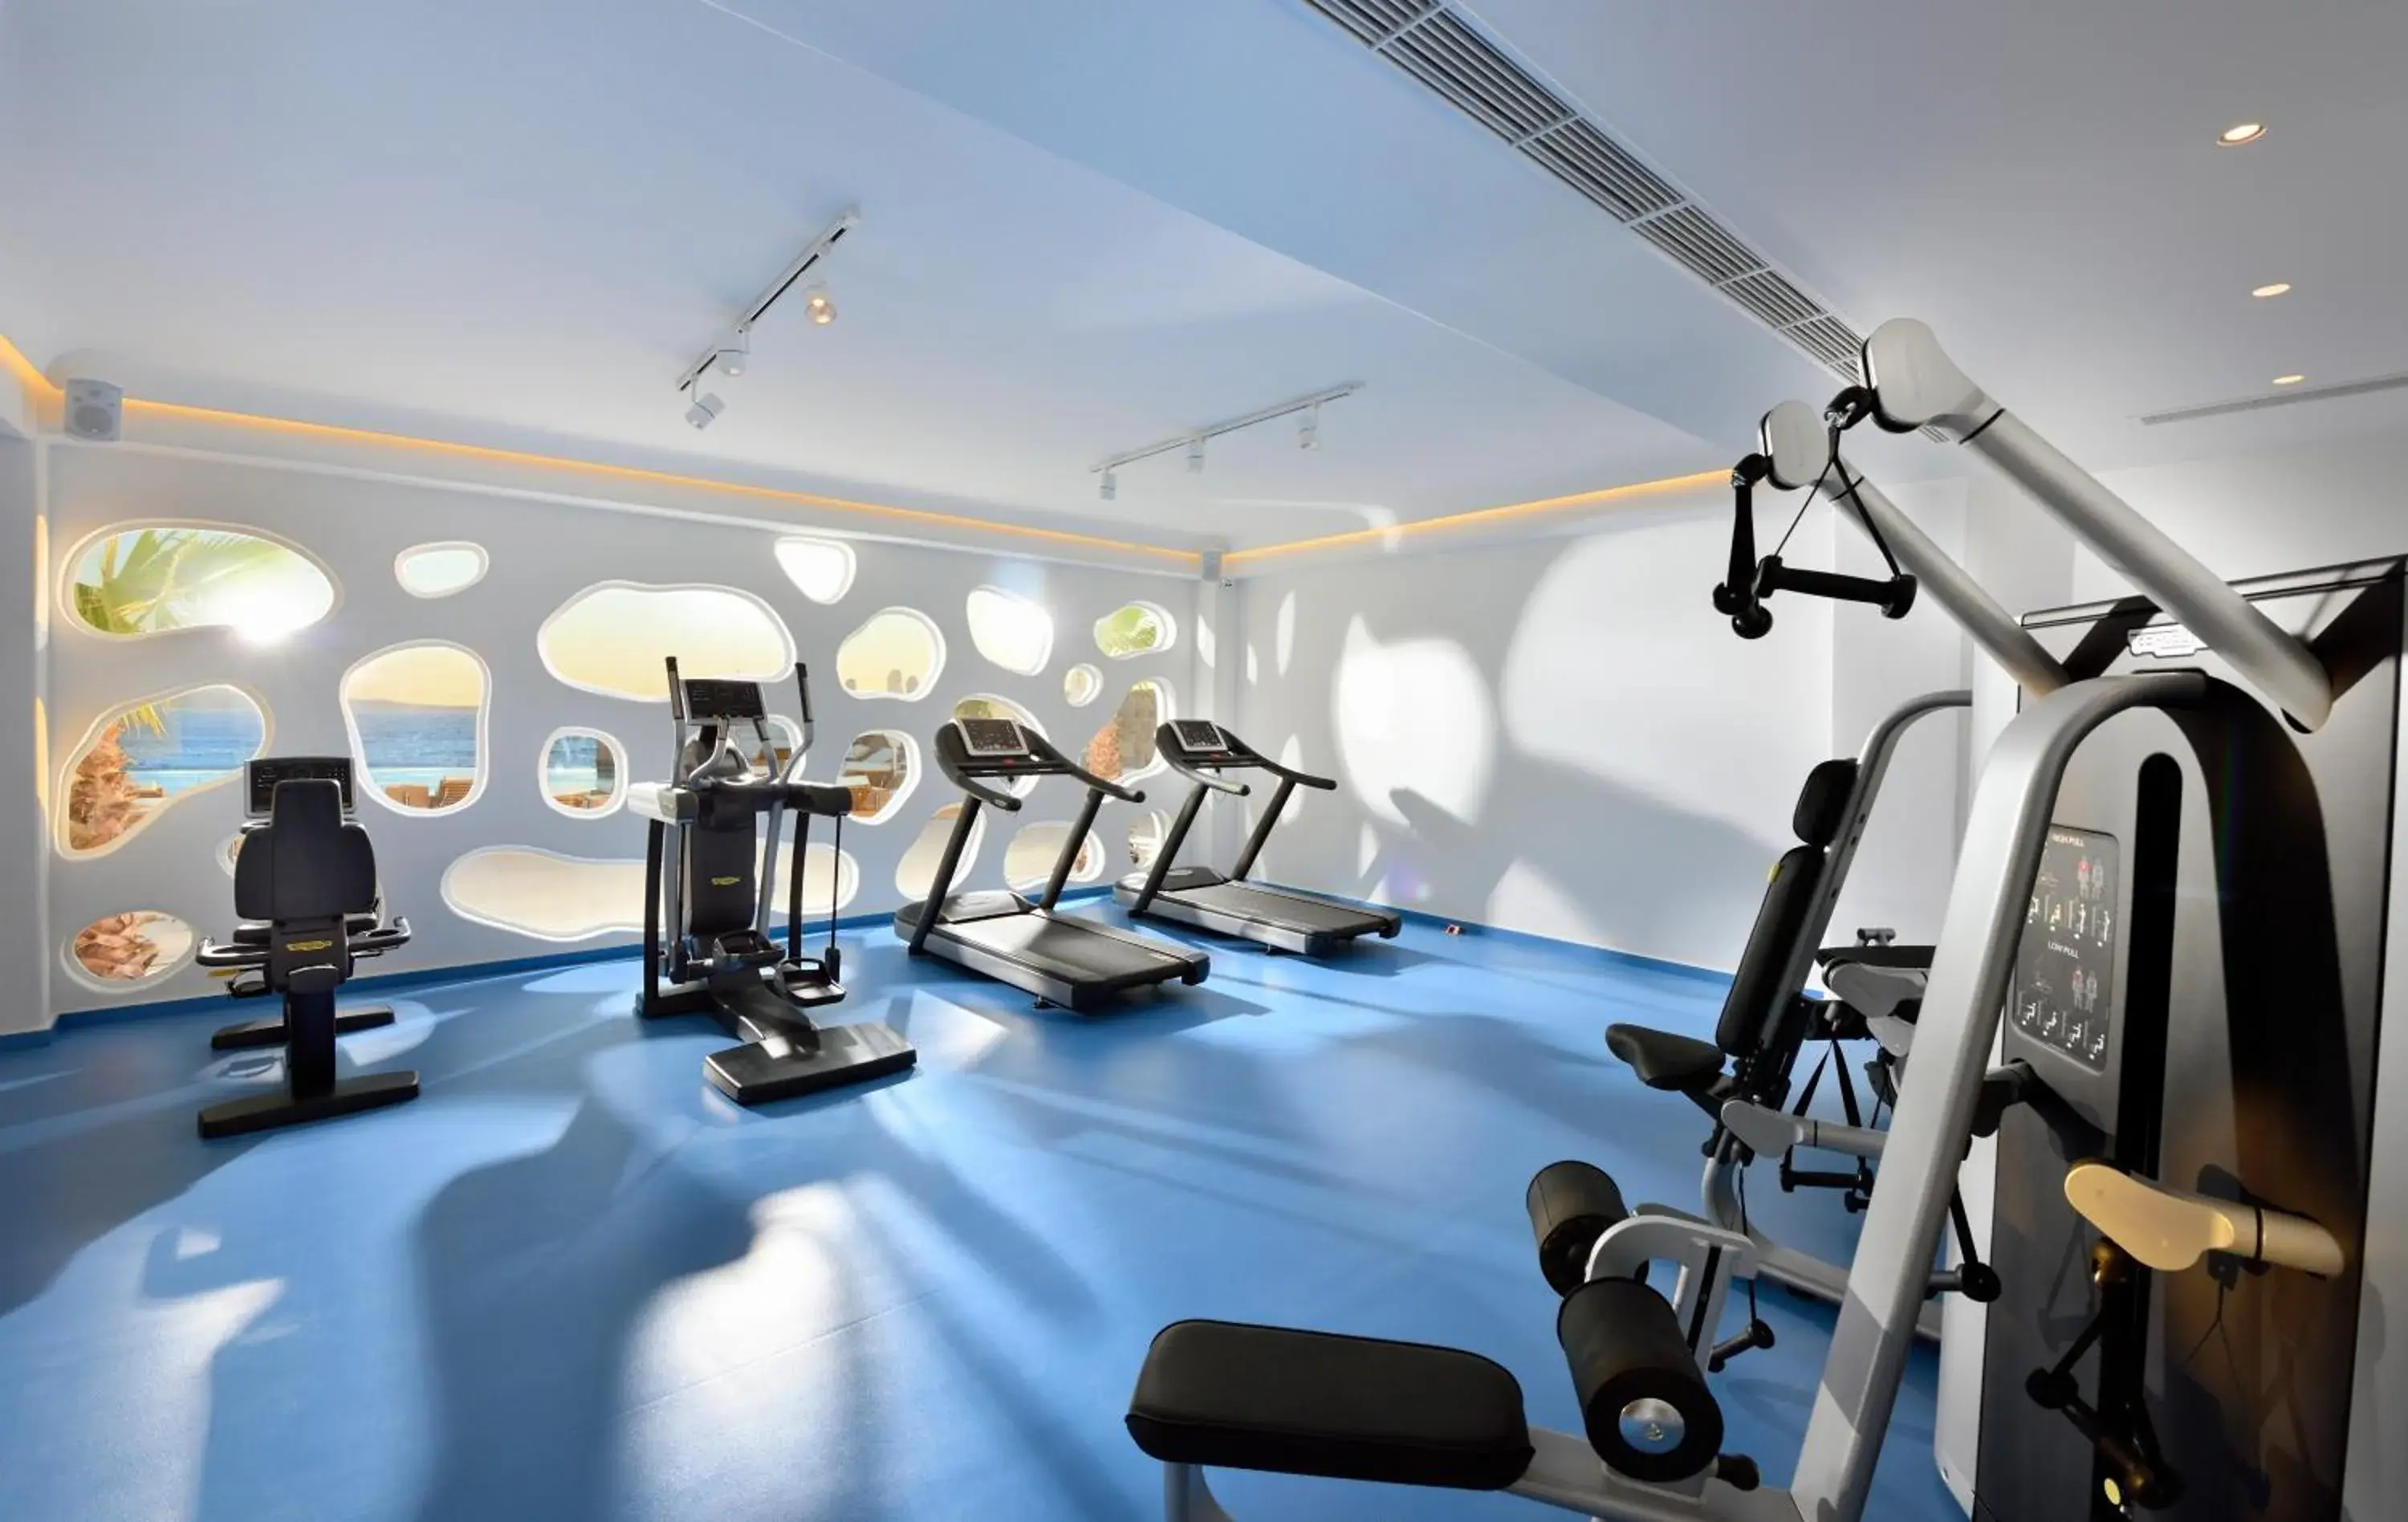 Fitness centre/facilities, Fitness Center/Facilities in Anax Resort and Spa